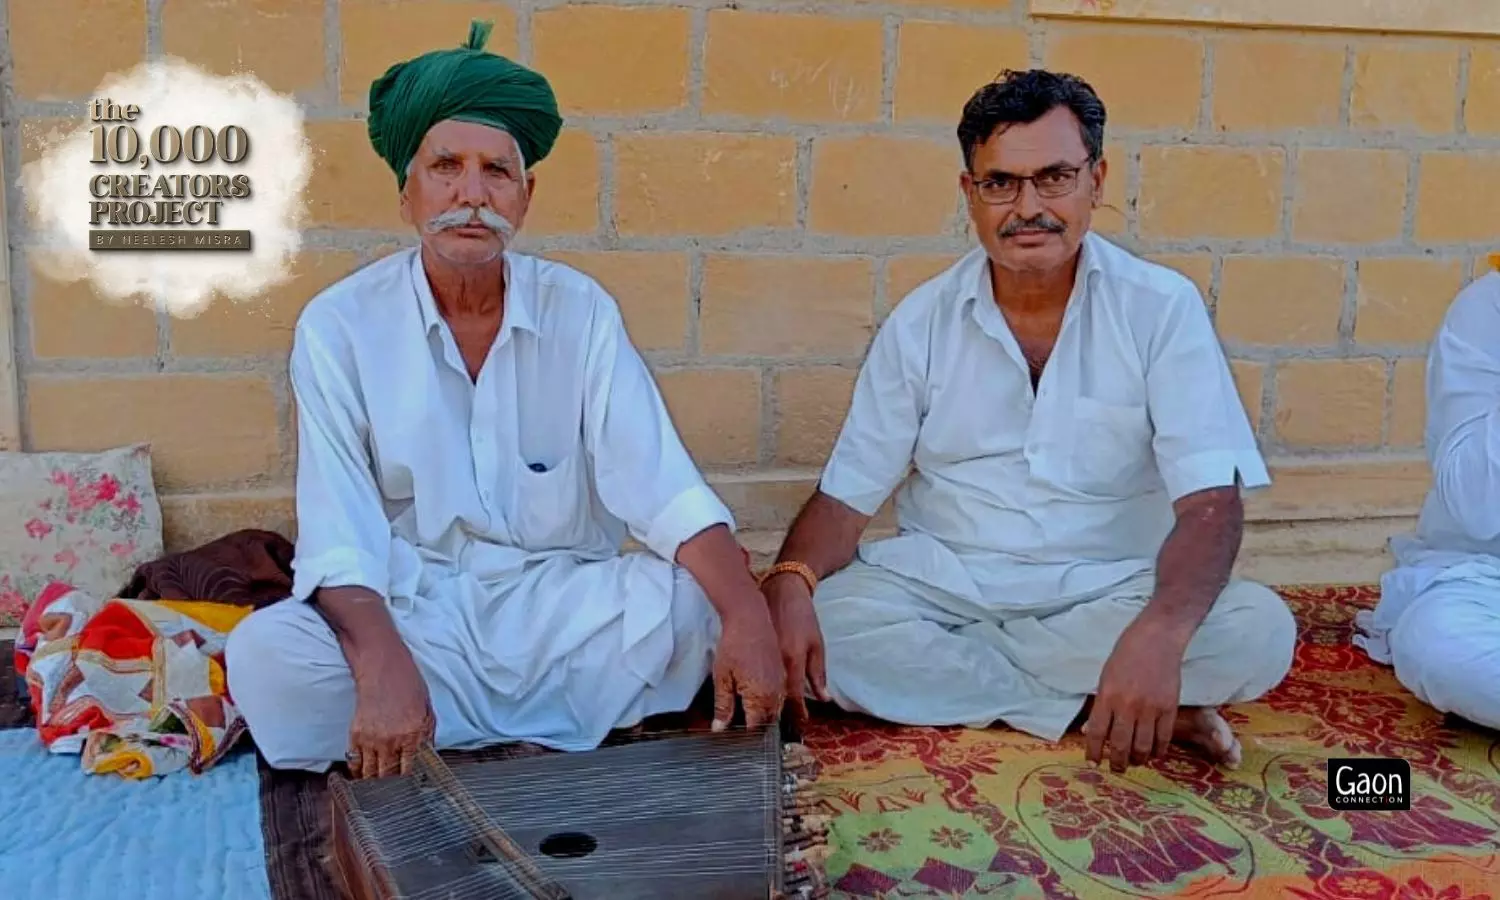 Will the Sur Mandal Fall Silent? — A Musician and a Craftsman in Jaisalmer Worry